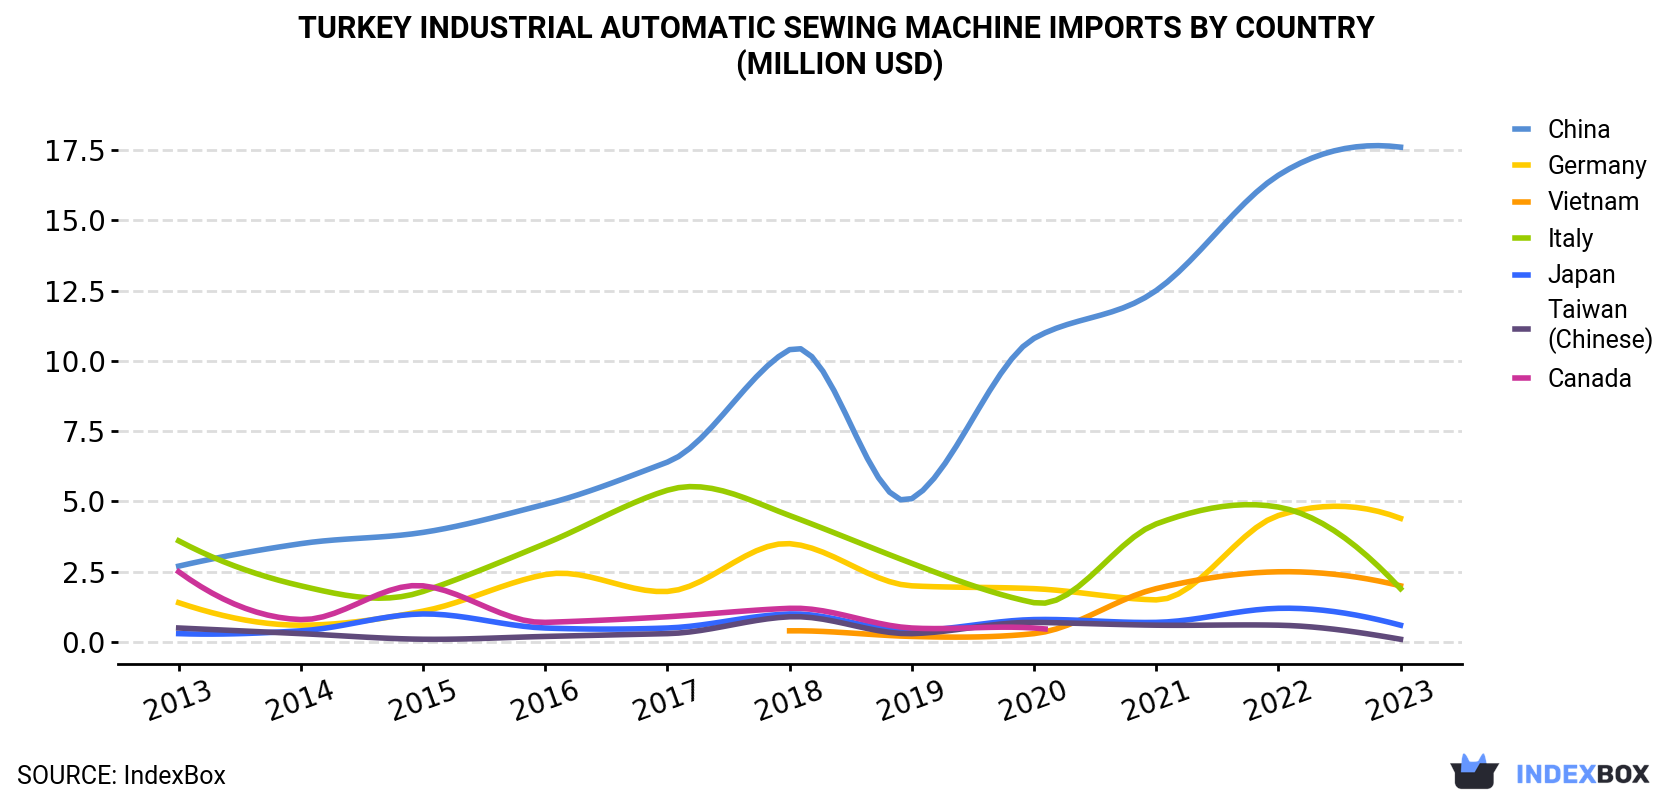 Turkey Industrial Automatic Sewing Machine Imports By Country (Million USD)